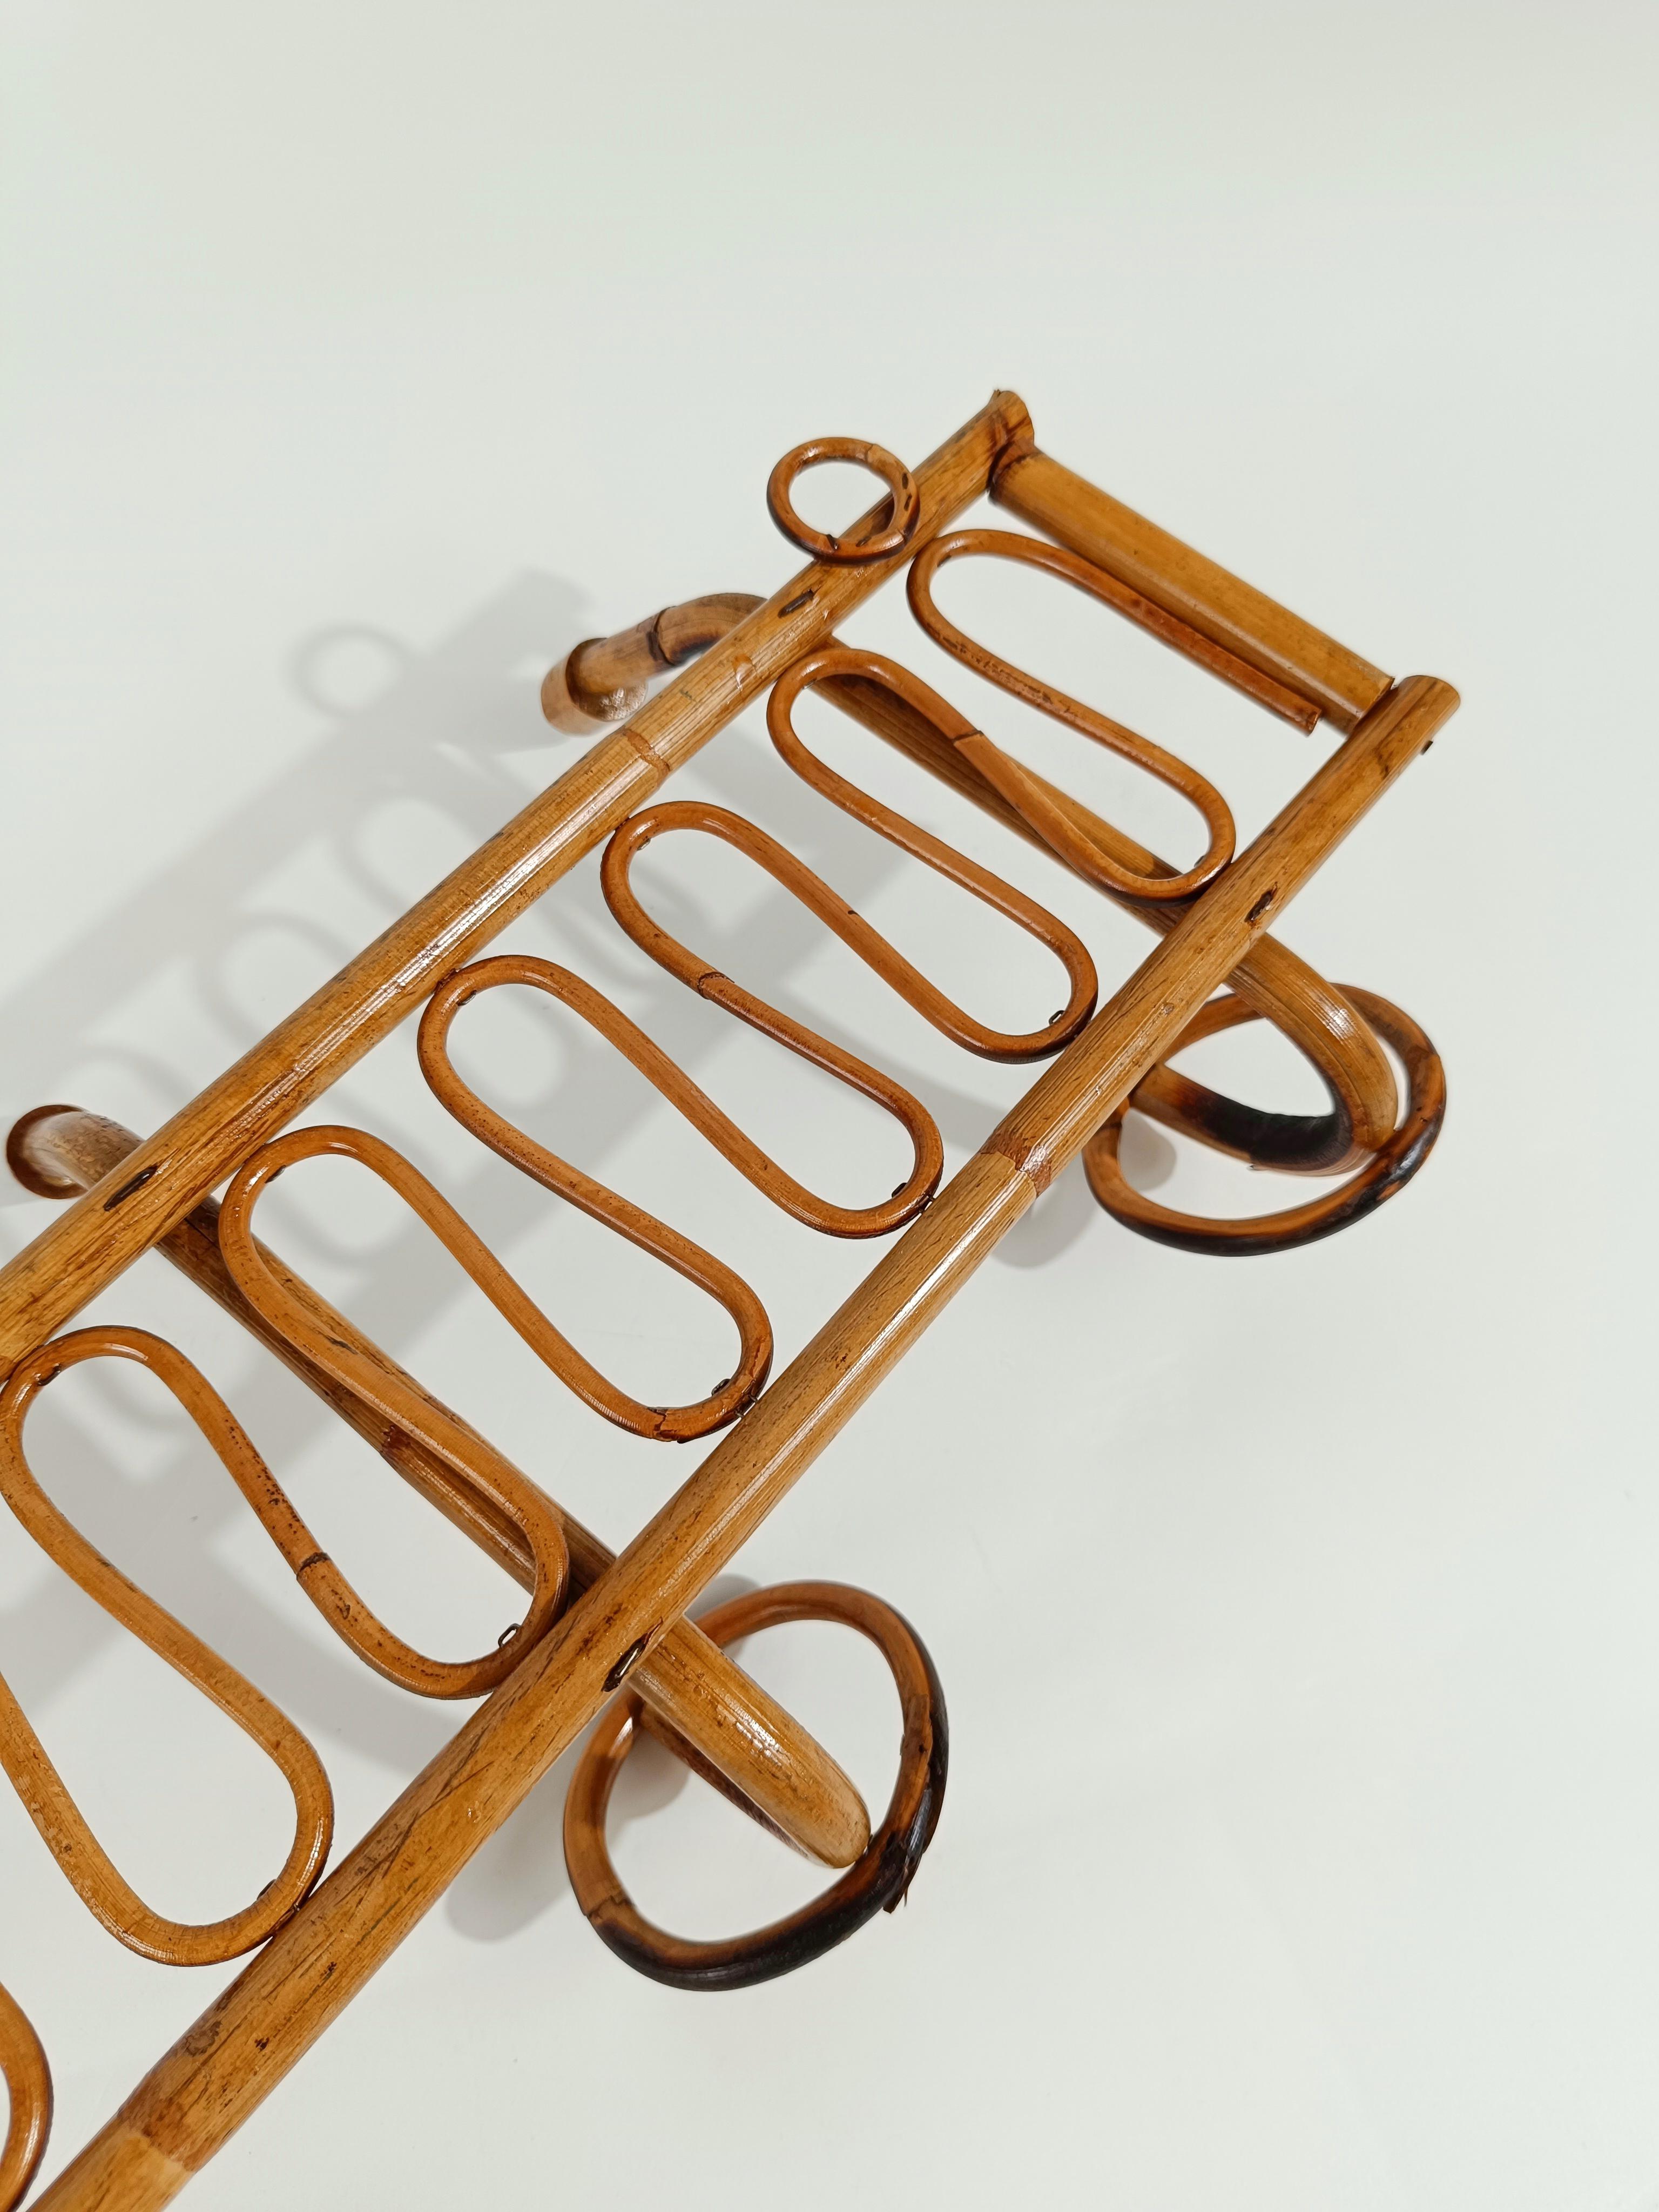 Midcentury Italian Riviera Rattan and Bamboo Wall Coat Rack / Wall Hanger 1960s For Sale 6